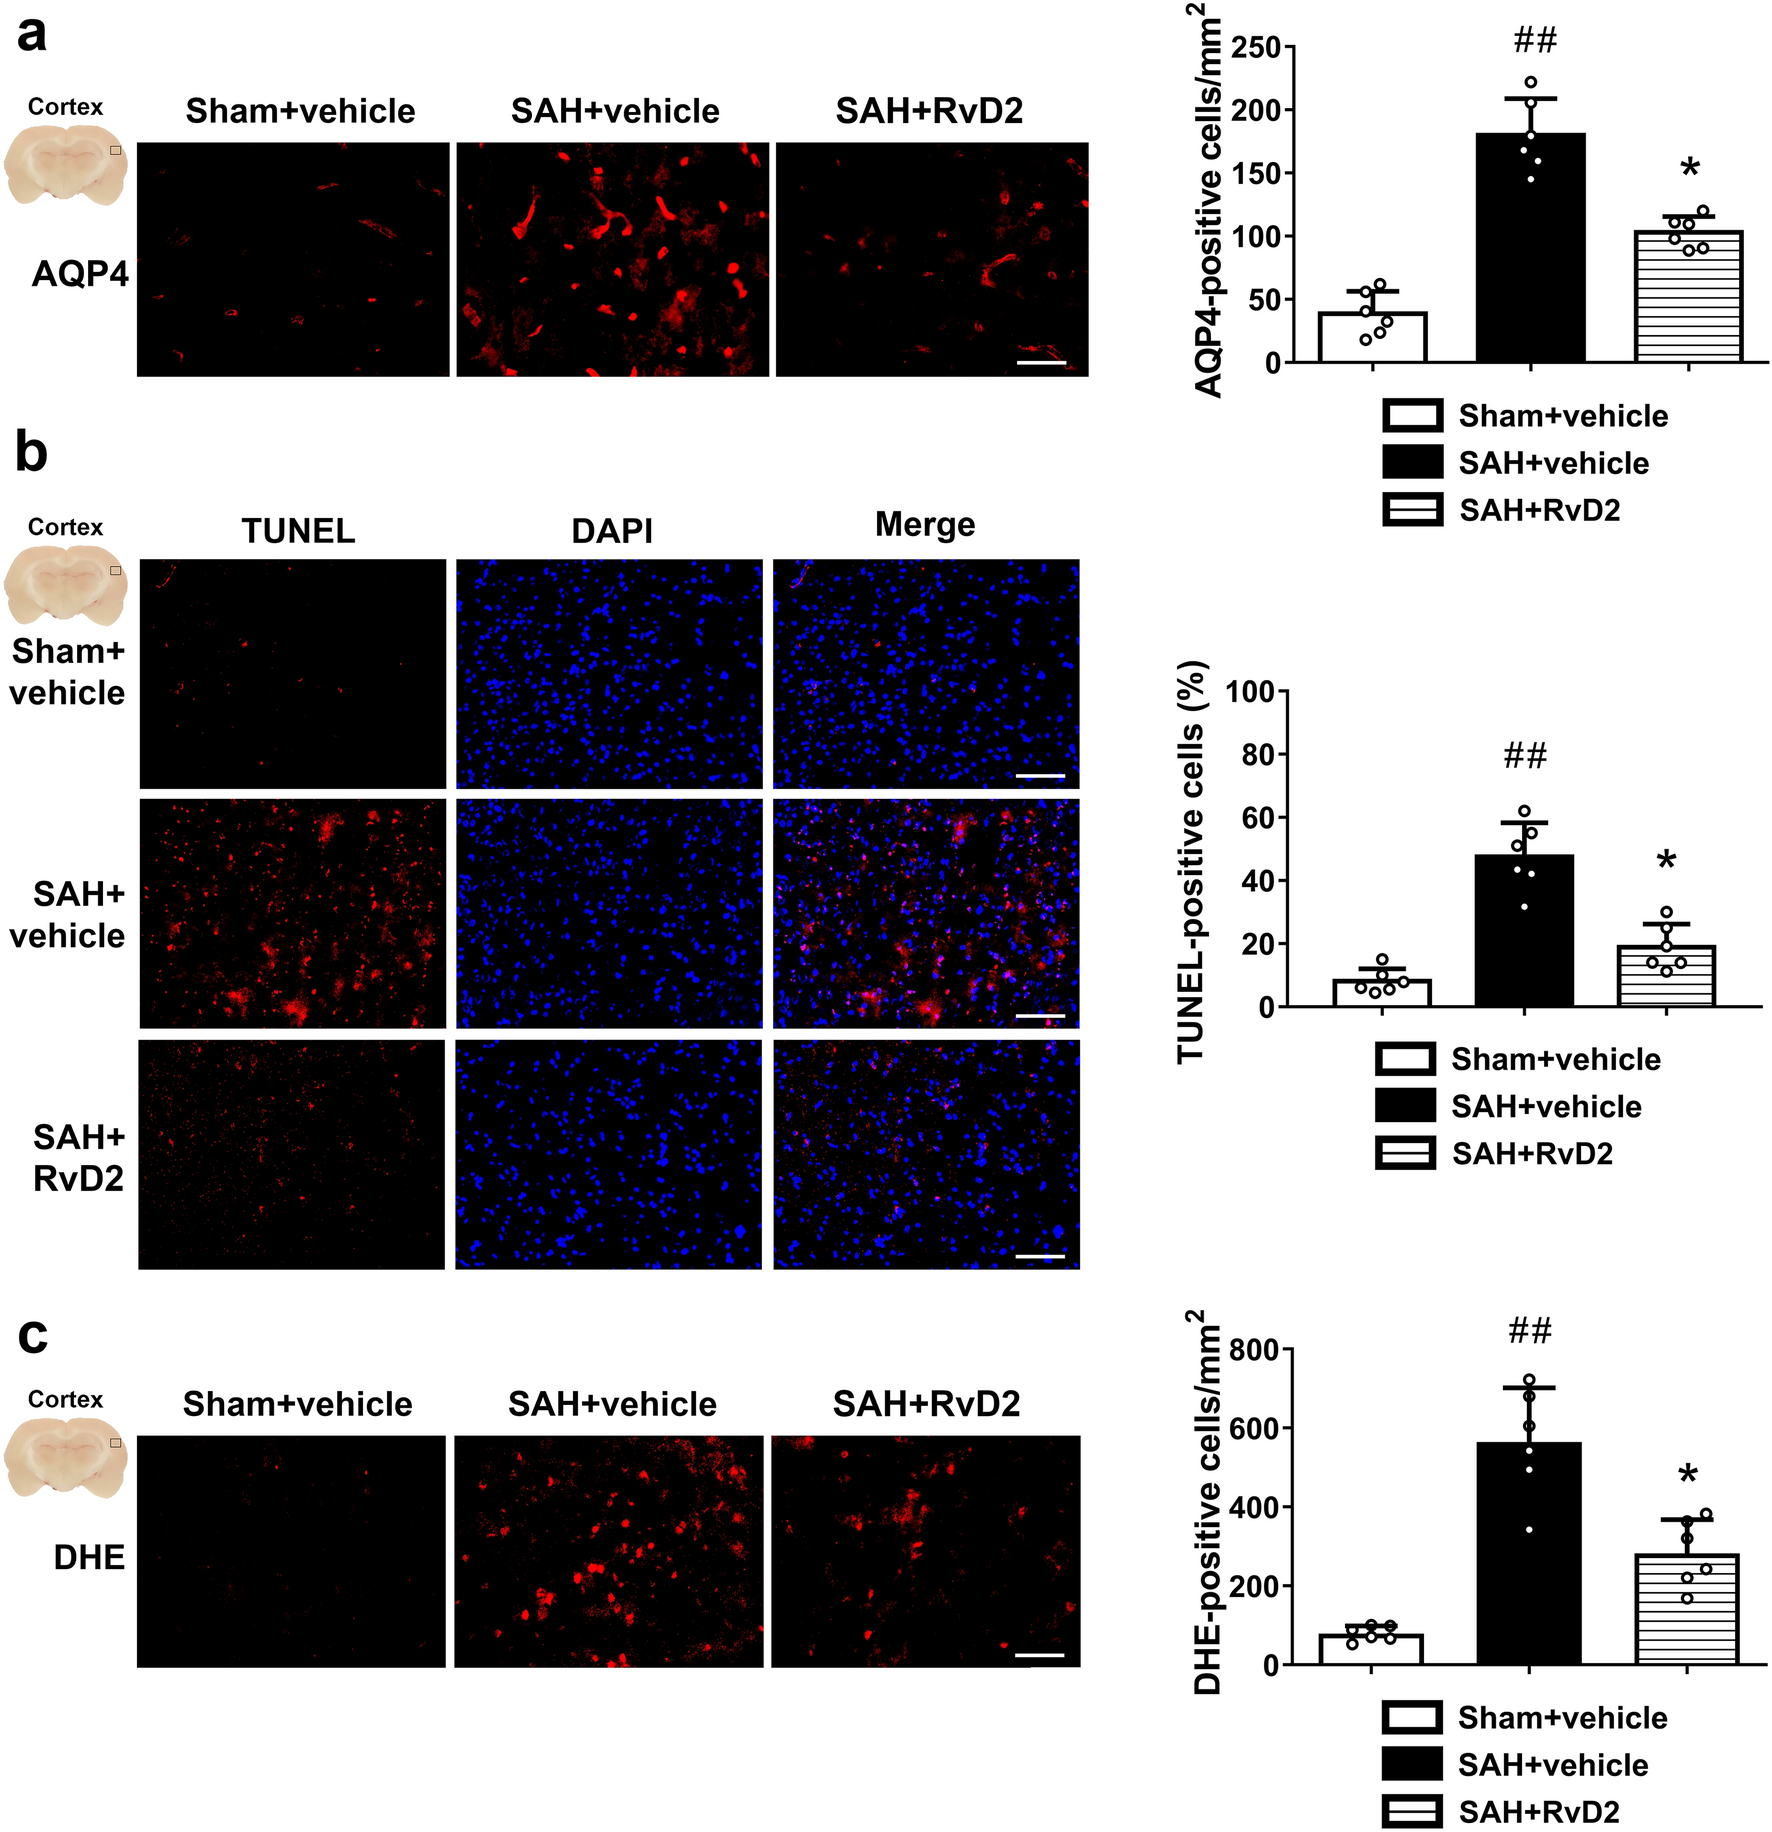 Correction: GPR18 Agonist Resolvin D2 Reduces Early Brain Injury in a Rat Model of Subarachnoid Hemorrhage by Multiple Protective Mechanisms